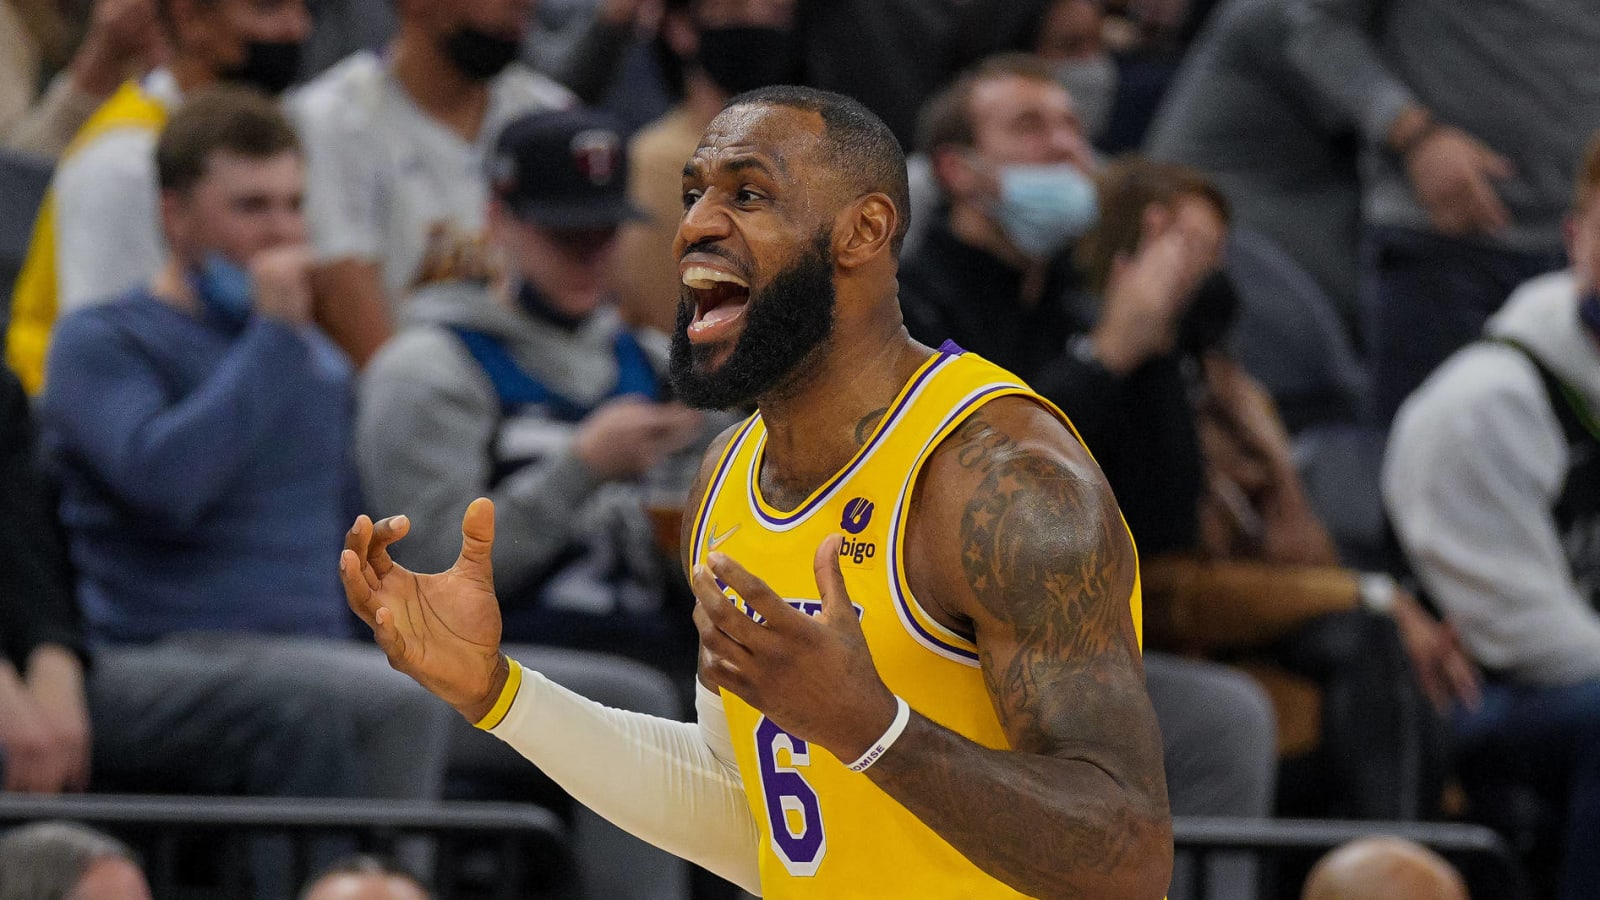 LeBron James admits Lakers going through 'rough patch'